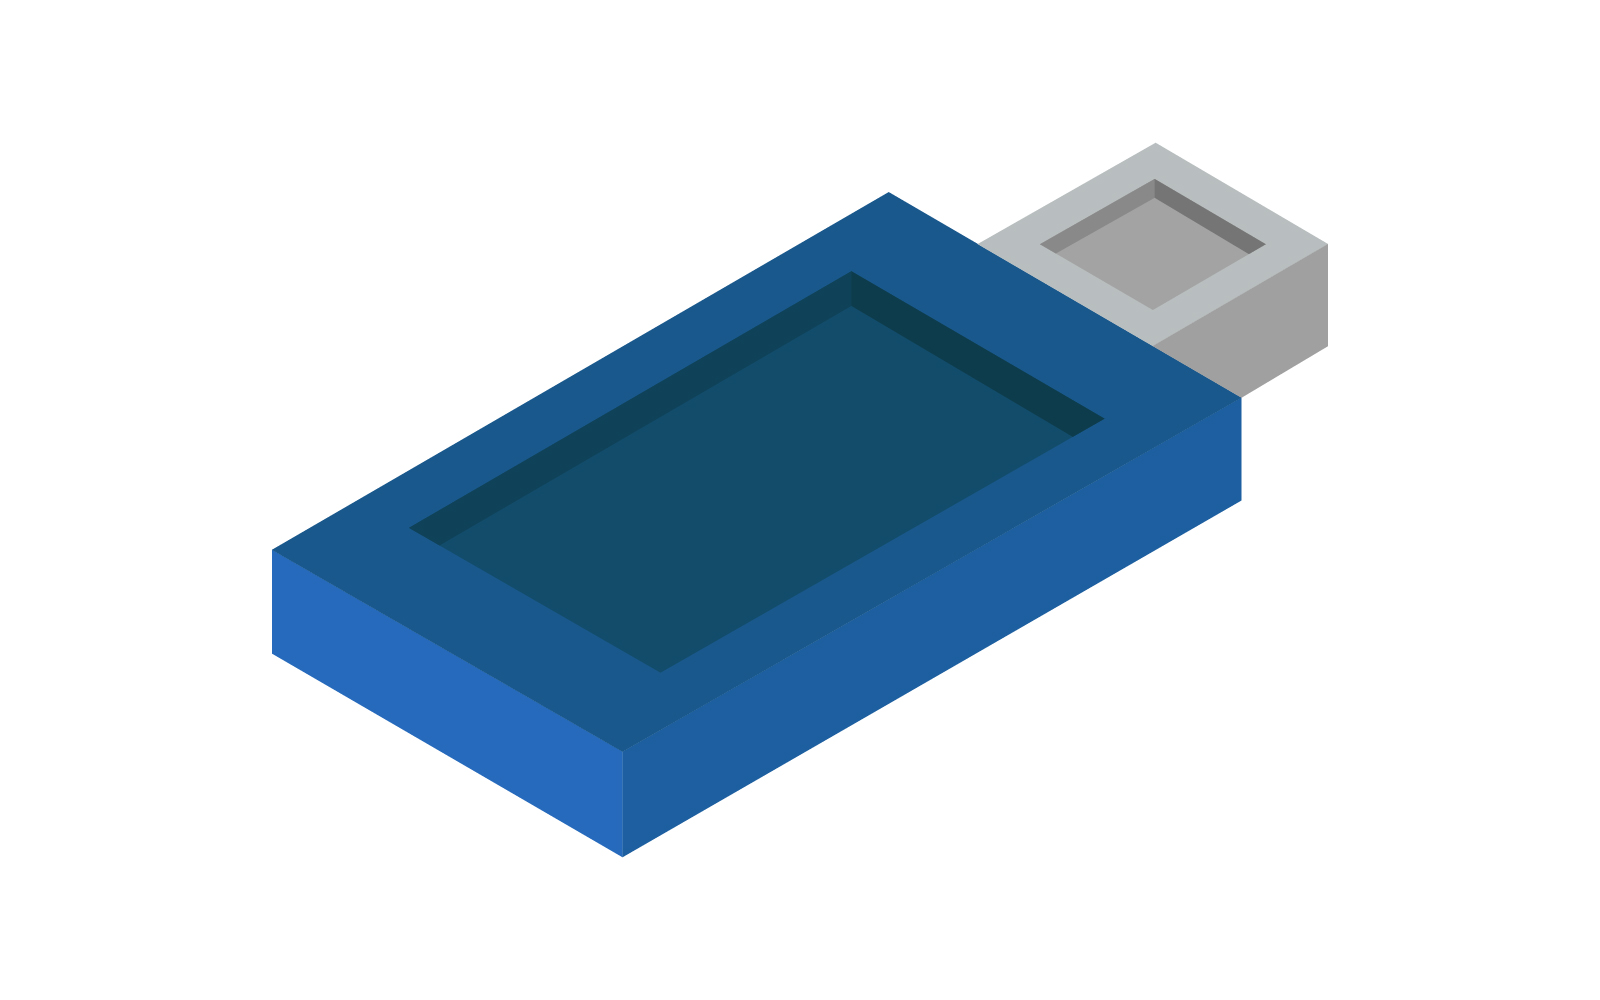 Isometric usb drive illustrated and colored in vector on background